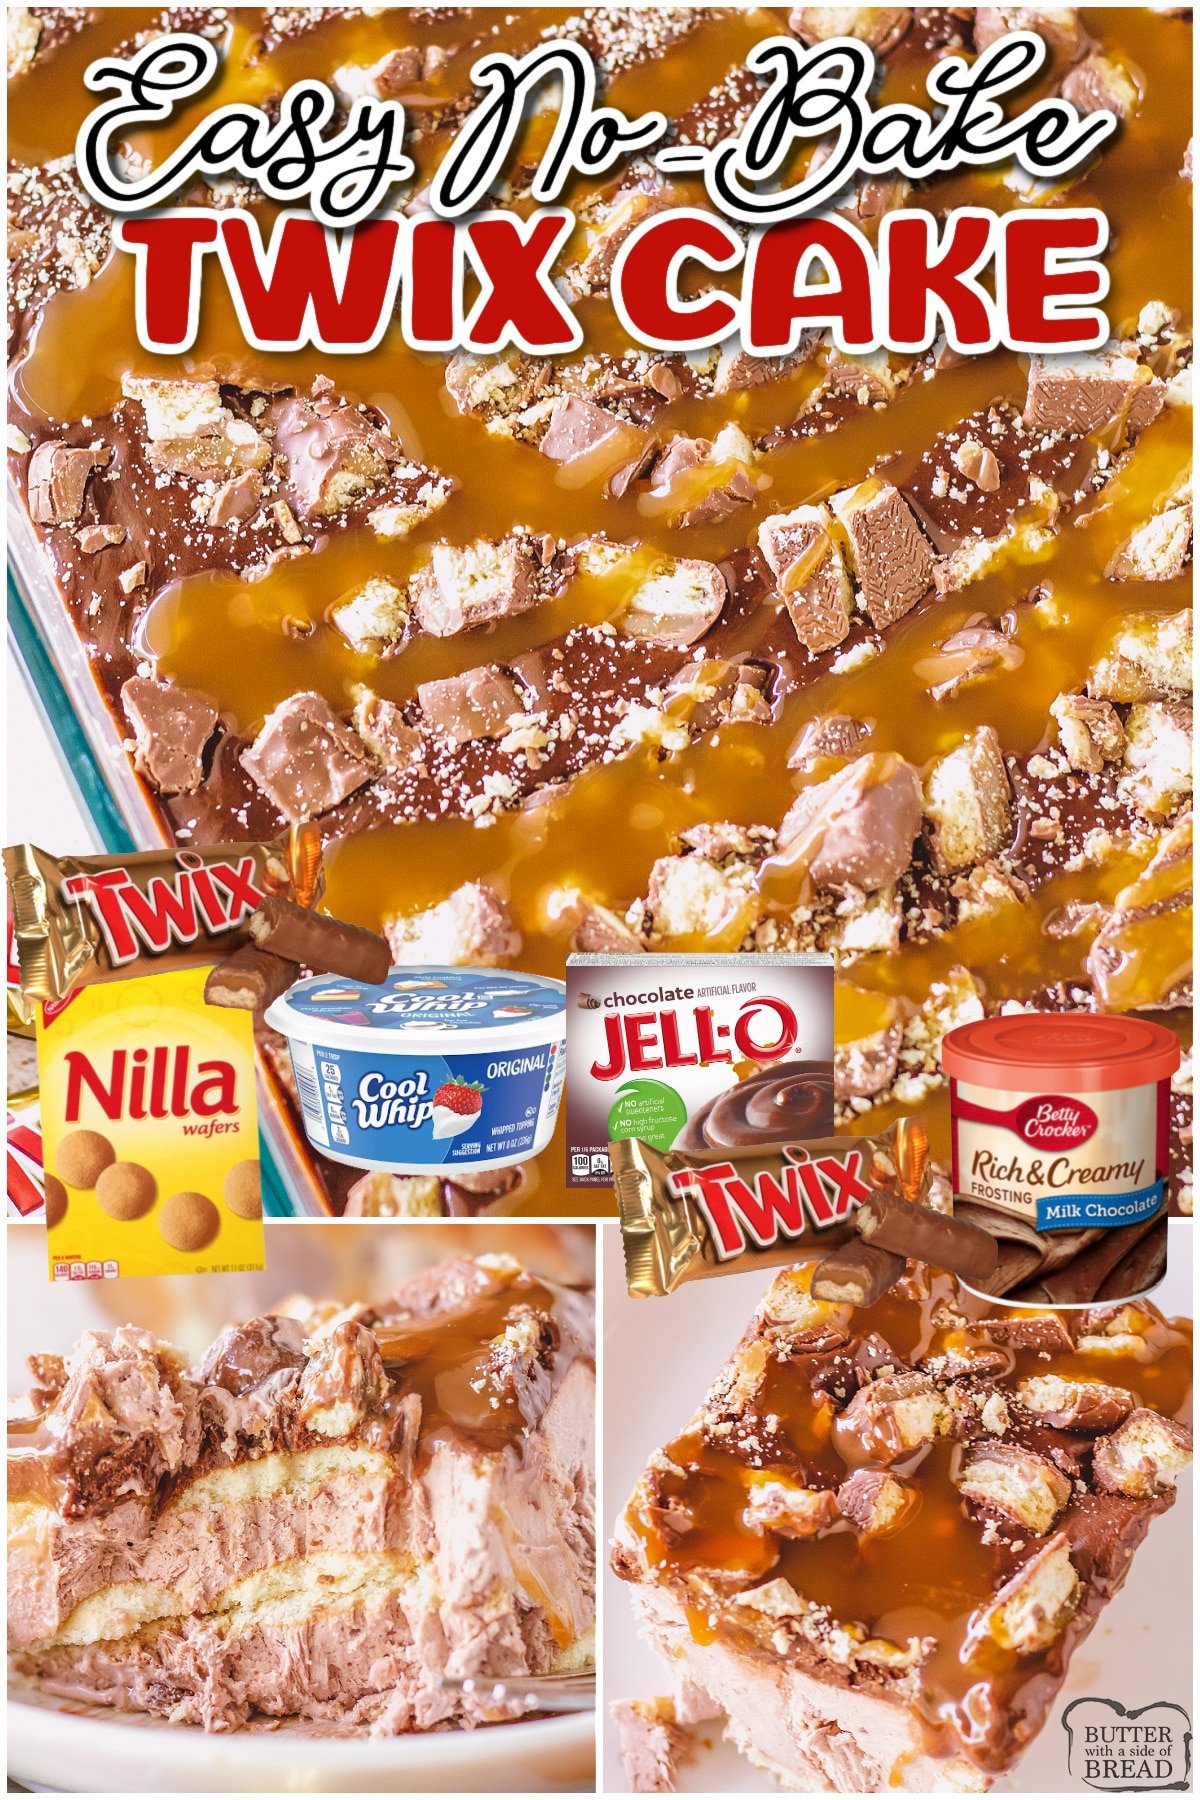 No-Bake Twix Cake is a layered pudding dessert that's perfect for summer! This no-bake cake is packed with chocolate caramel flavors & topped with Twix candy bars!